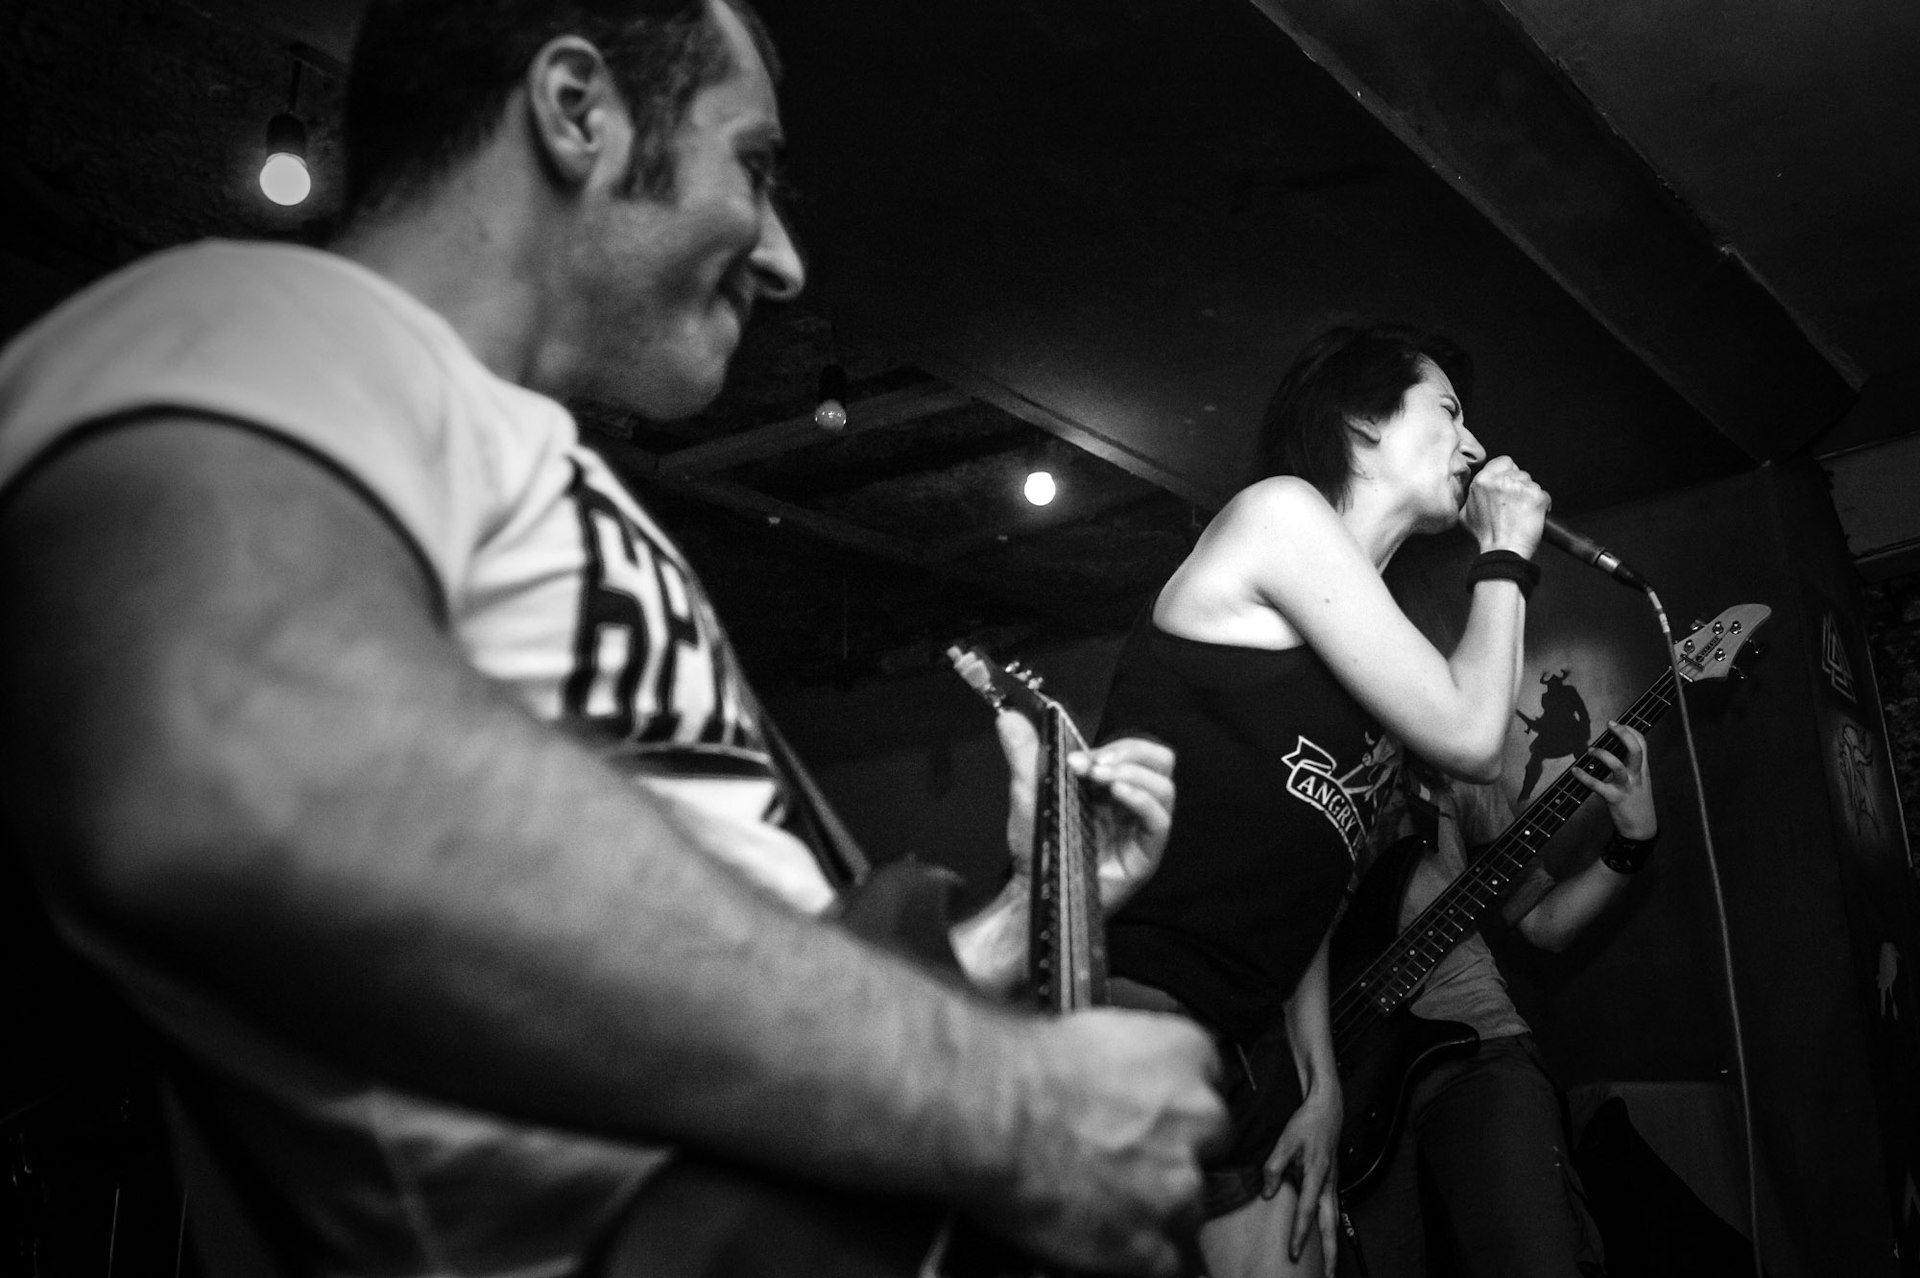 The Russian-Georgian punk band Catalina, formed last year, performs at the Valhalla Bar, also located in Tbilisi’s Old Town. It’s lead singer, Maria Pronchenko says the band’s songs are intended to encourage youth to think for themselves. 